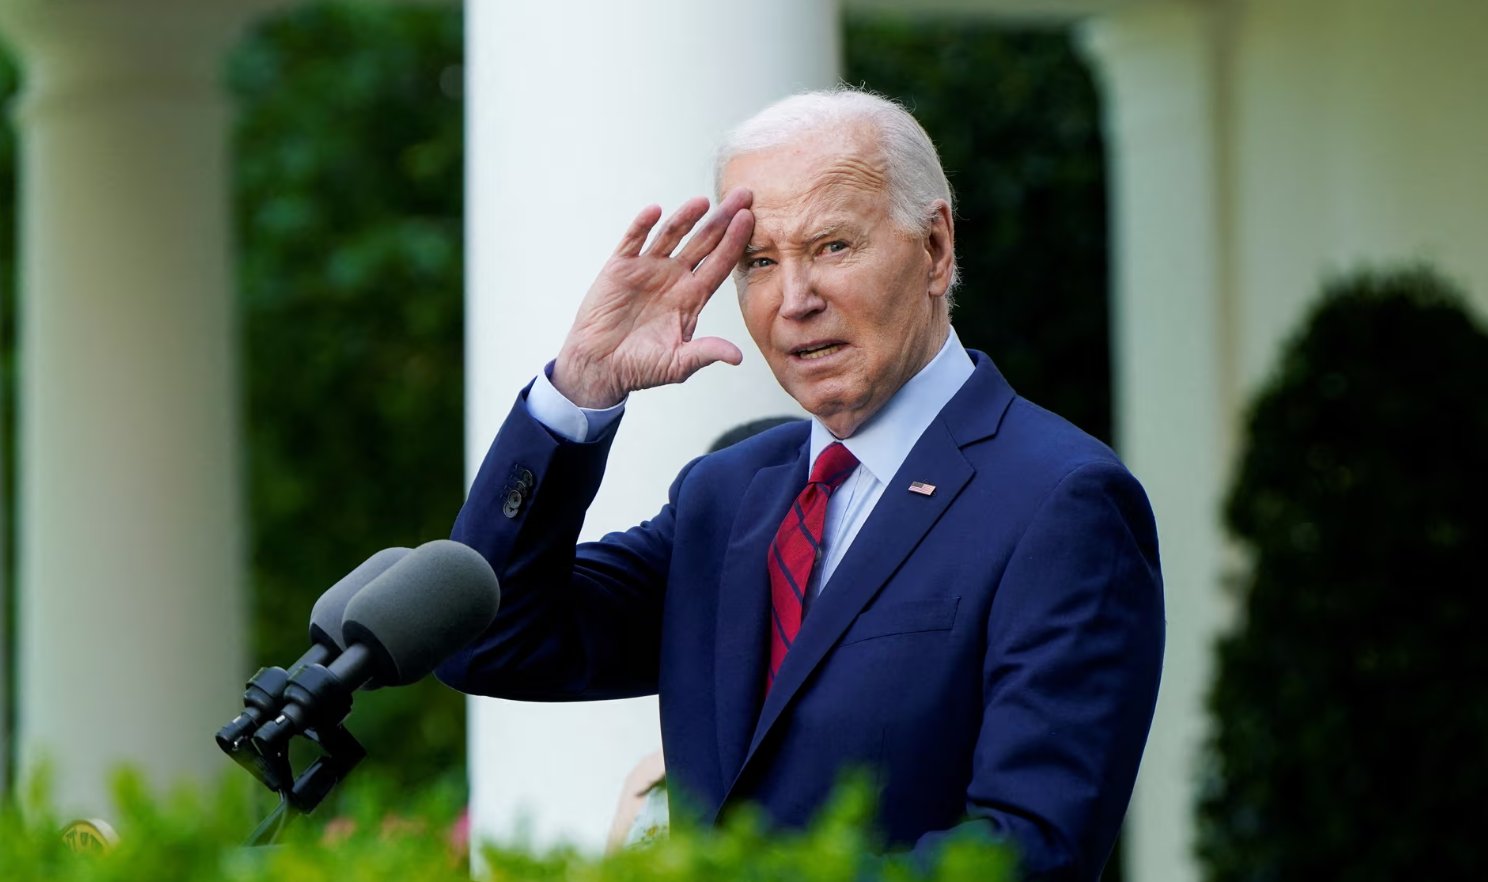 Trump turns trial into circus as Biden tries to focus minds on economy